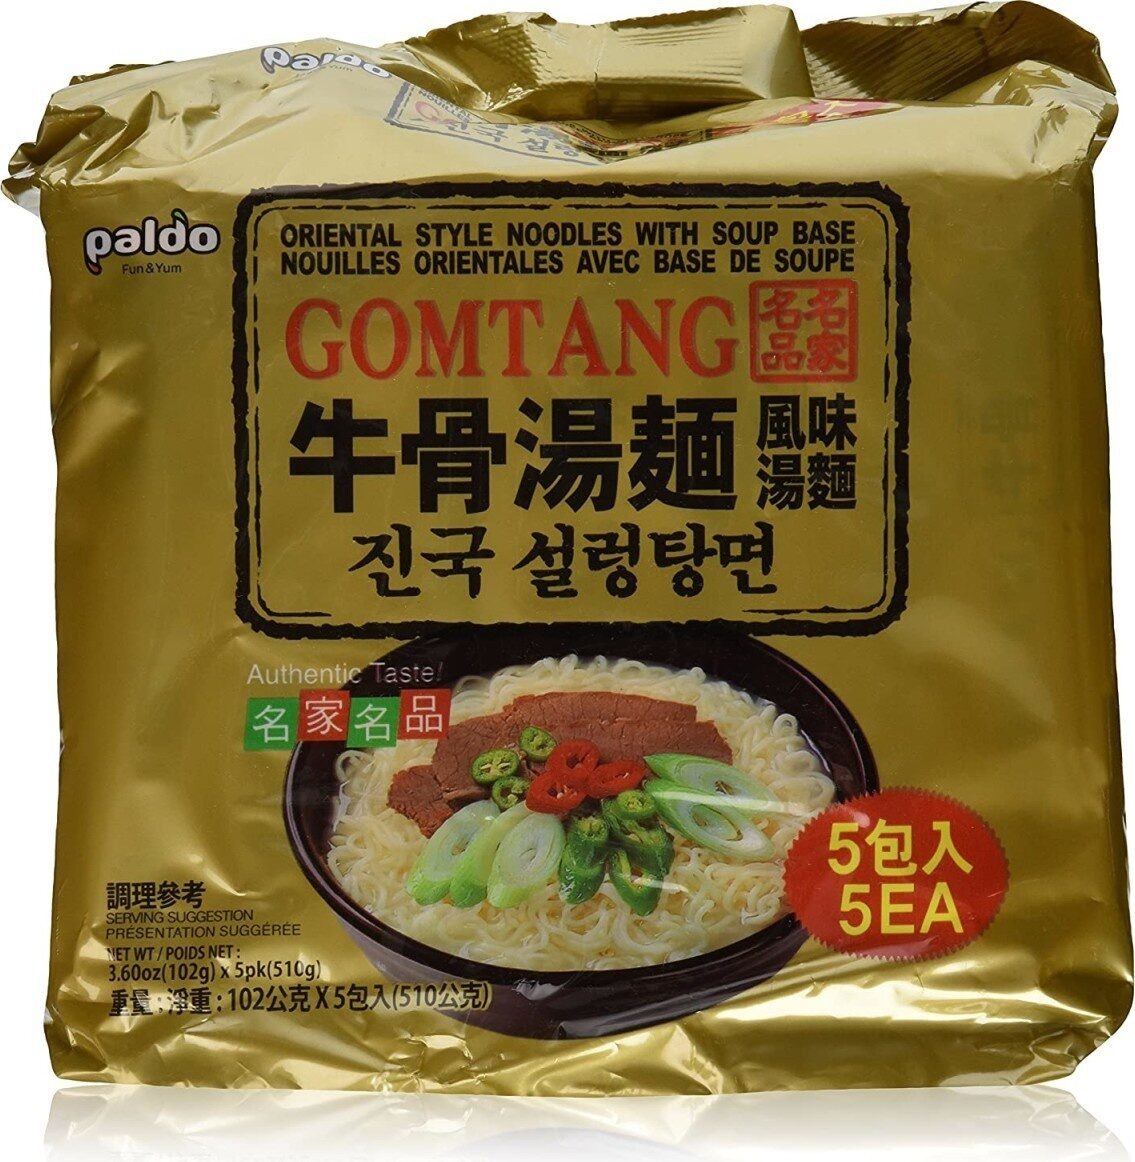 Picture of Paldo 352738 18 oz Ramen Gomtang Soup - Pack of 4